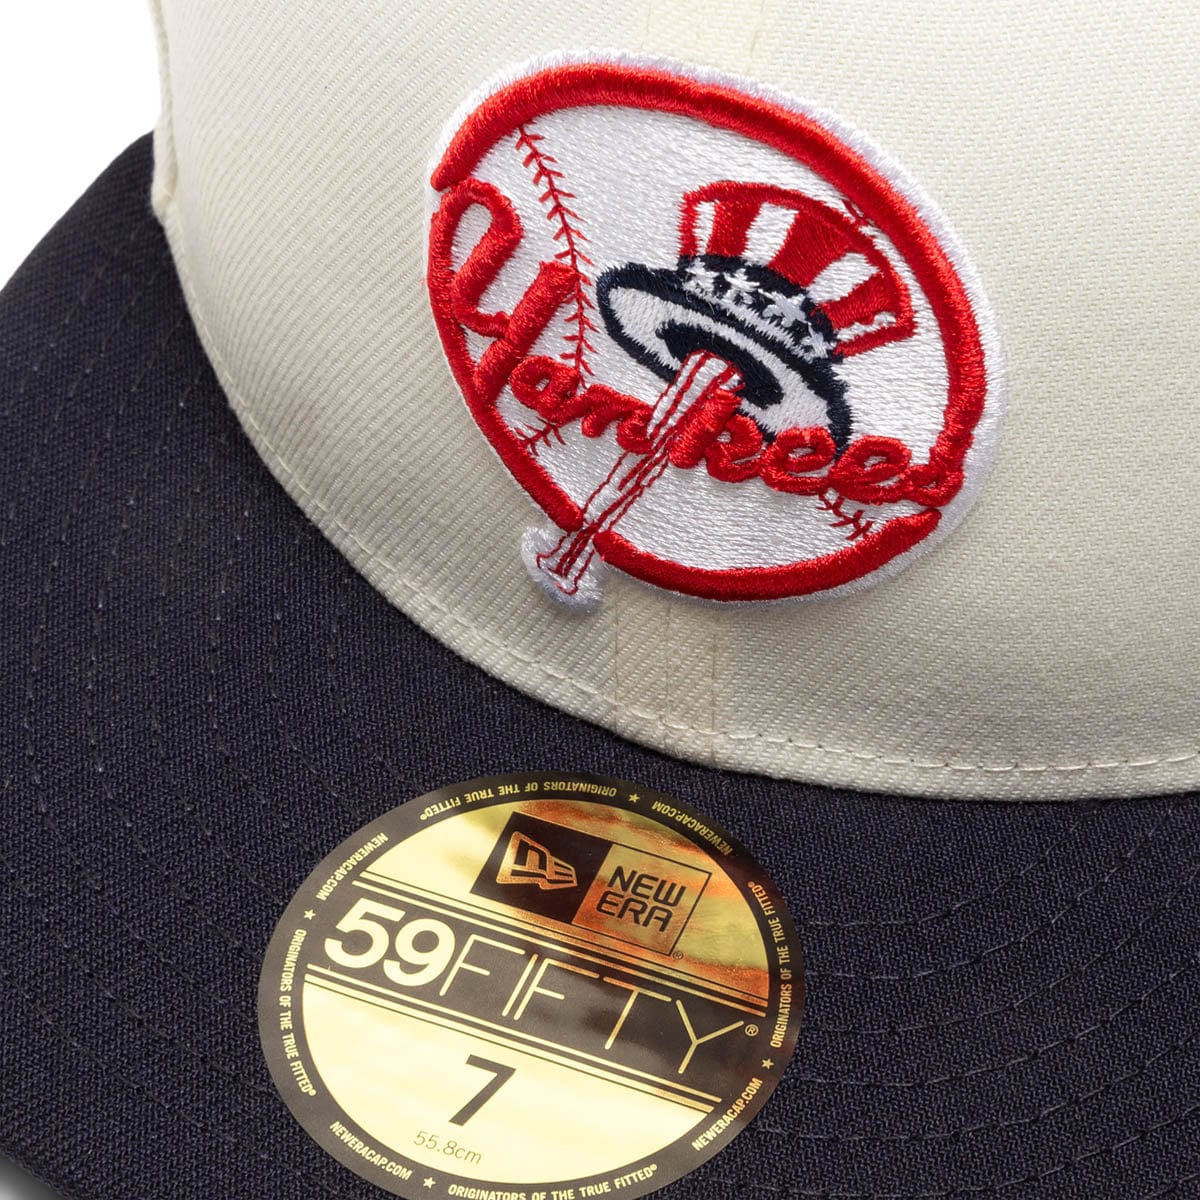 New Era Headwear 59FIFTY NEW YORK YANKEES WS FITTED CAP